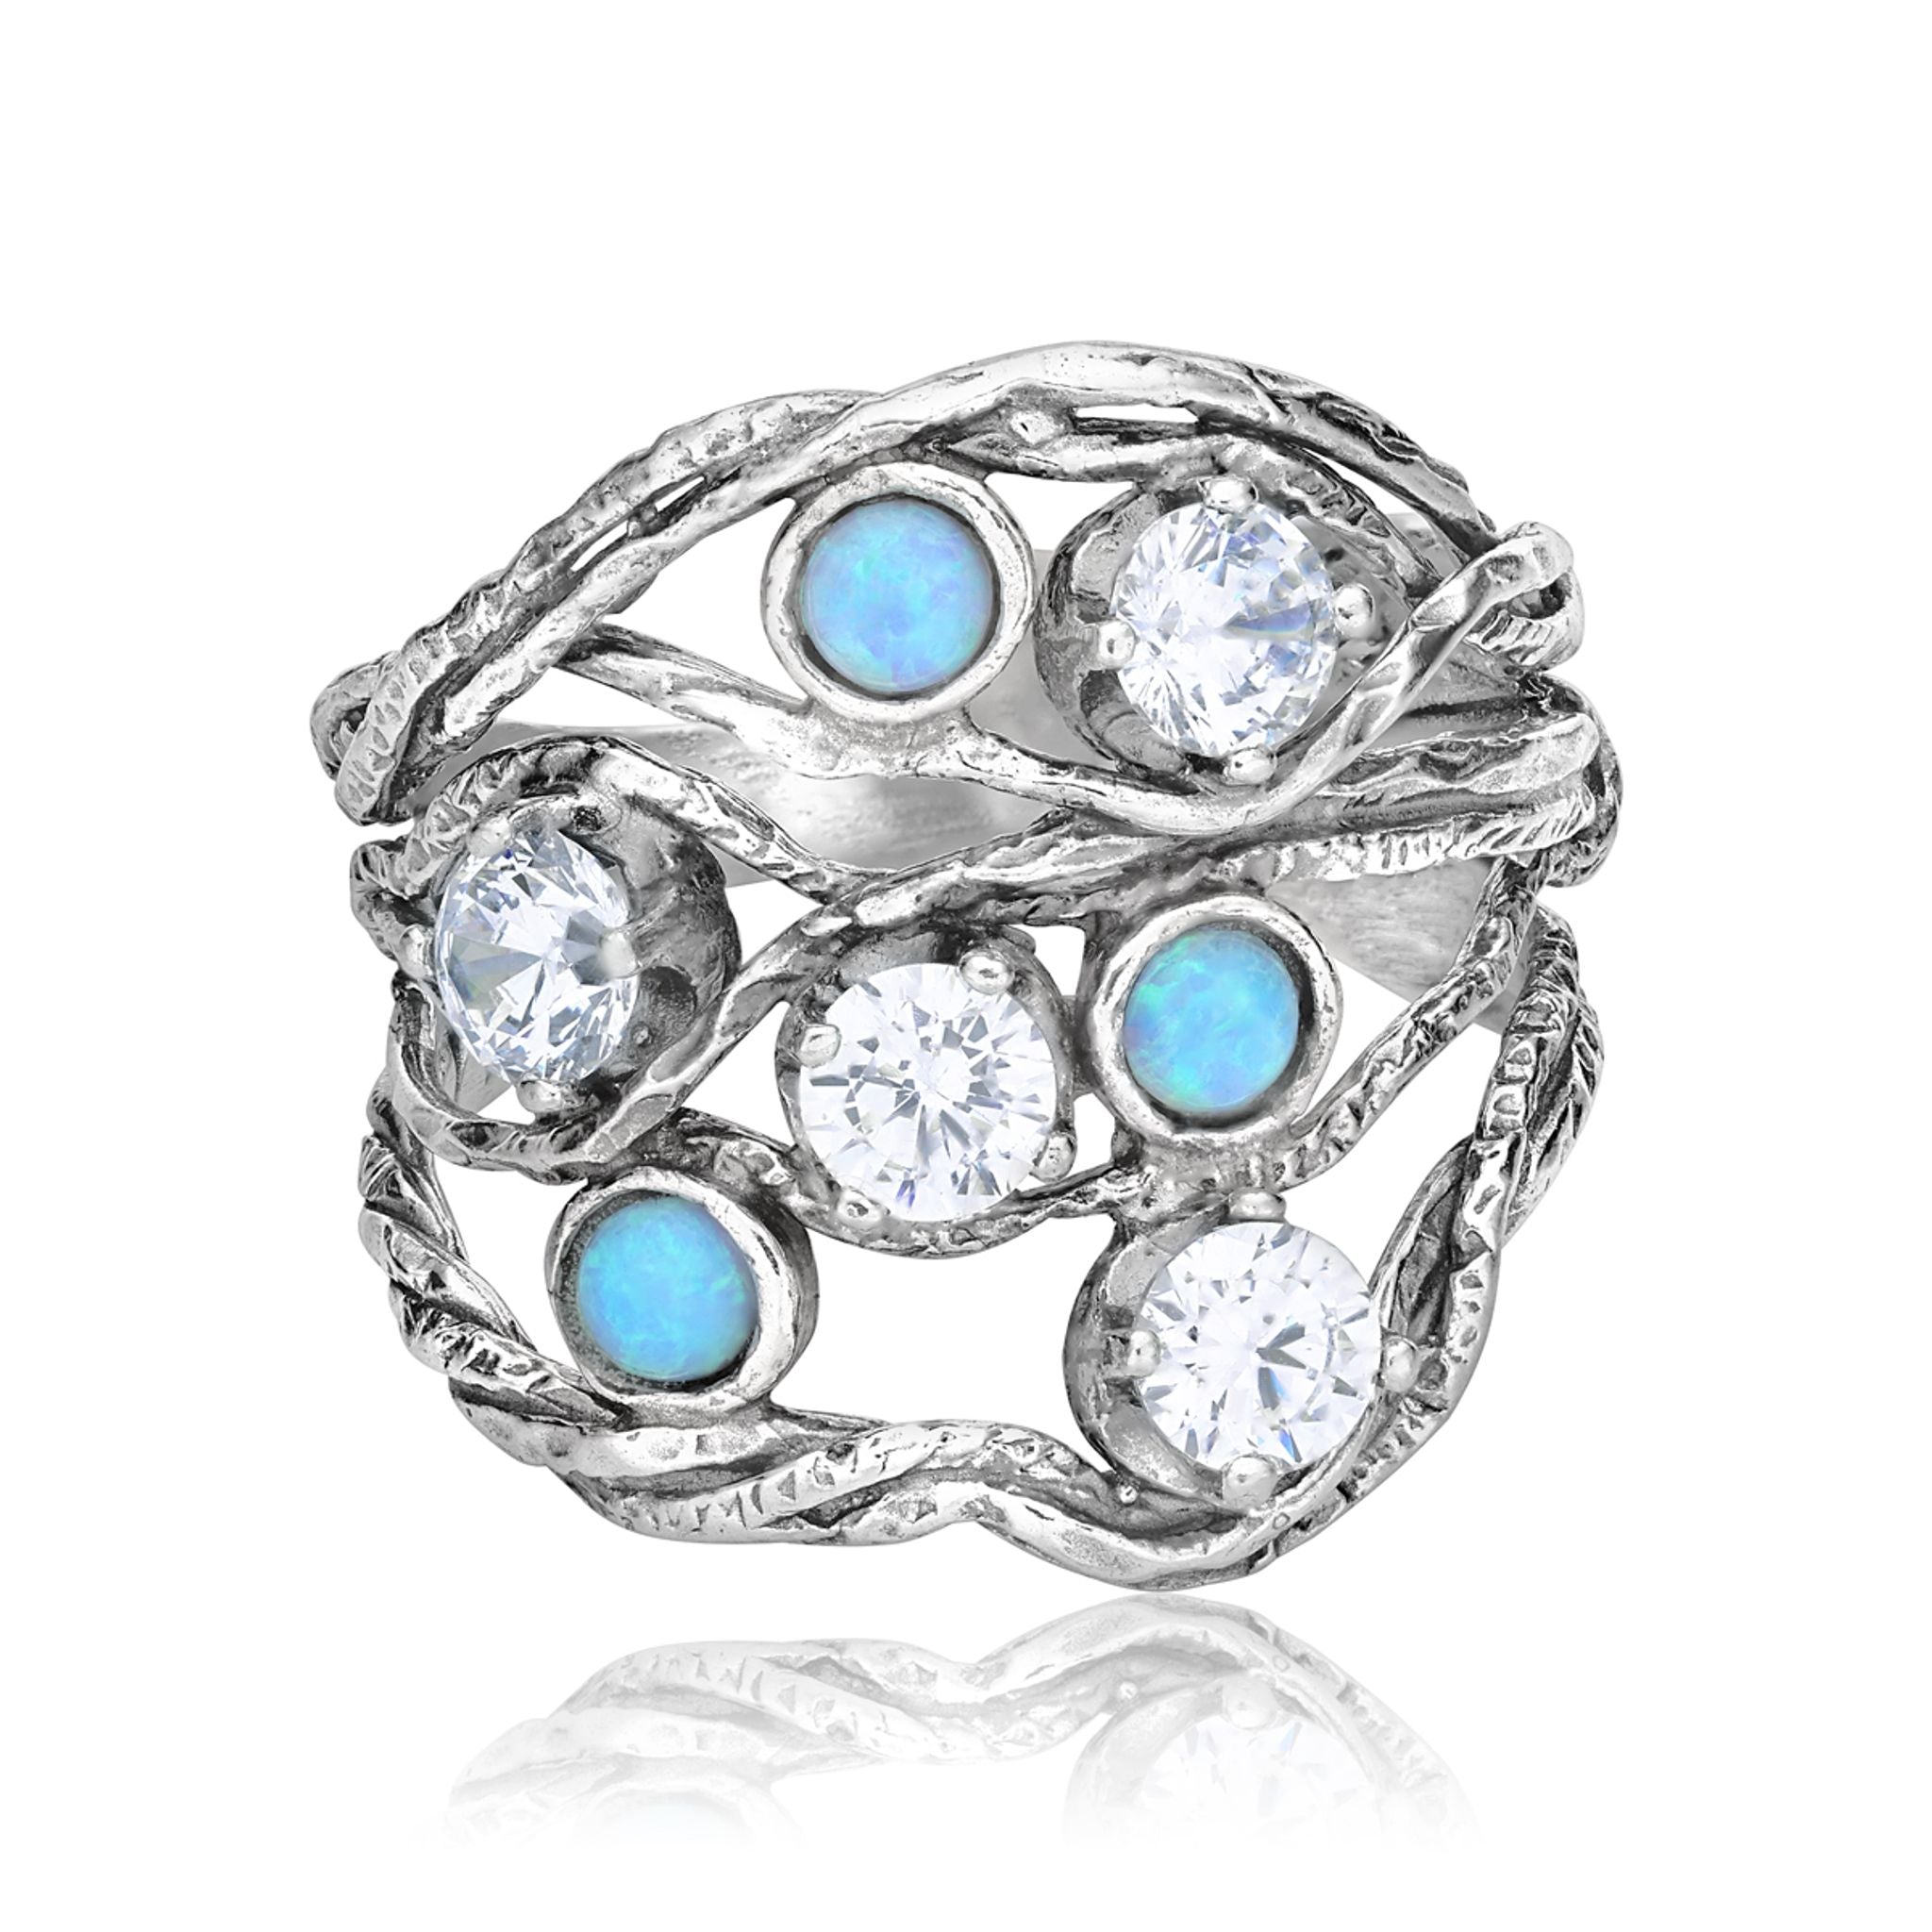 Intricate Sterling Silver Opal and CZ Ring